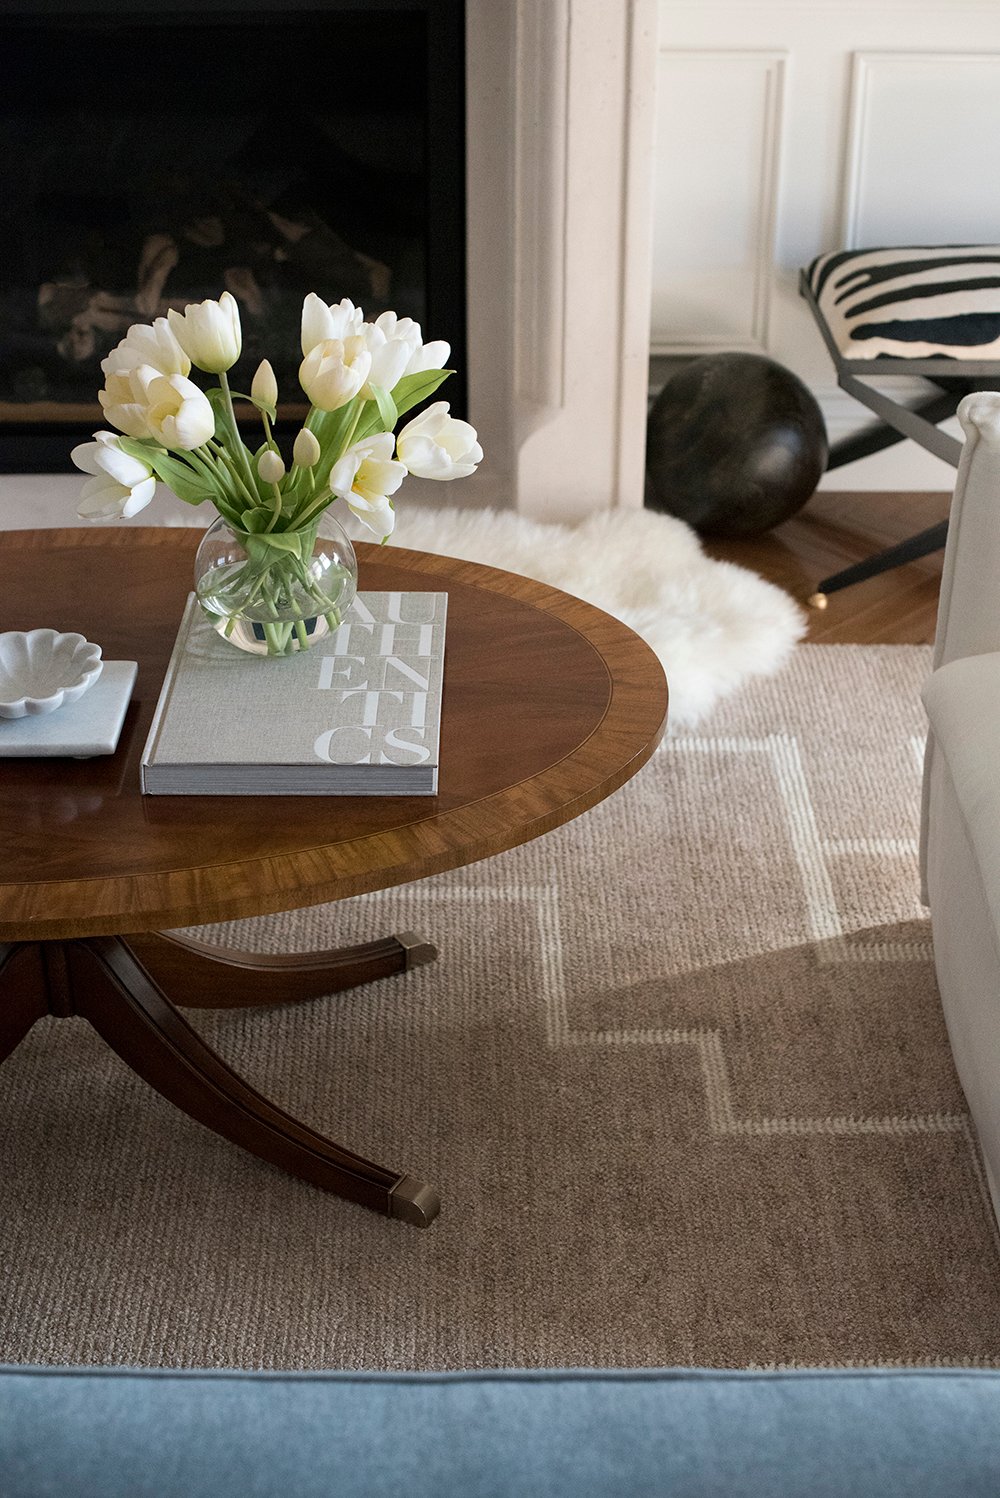 10 Tips for Identifying Quality Furniture - roomfortuesday.com